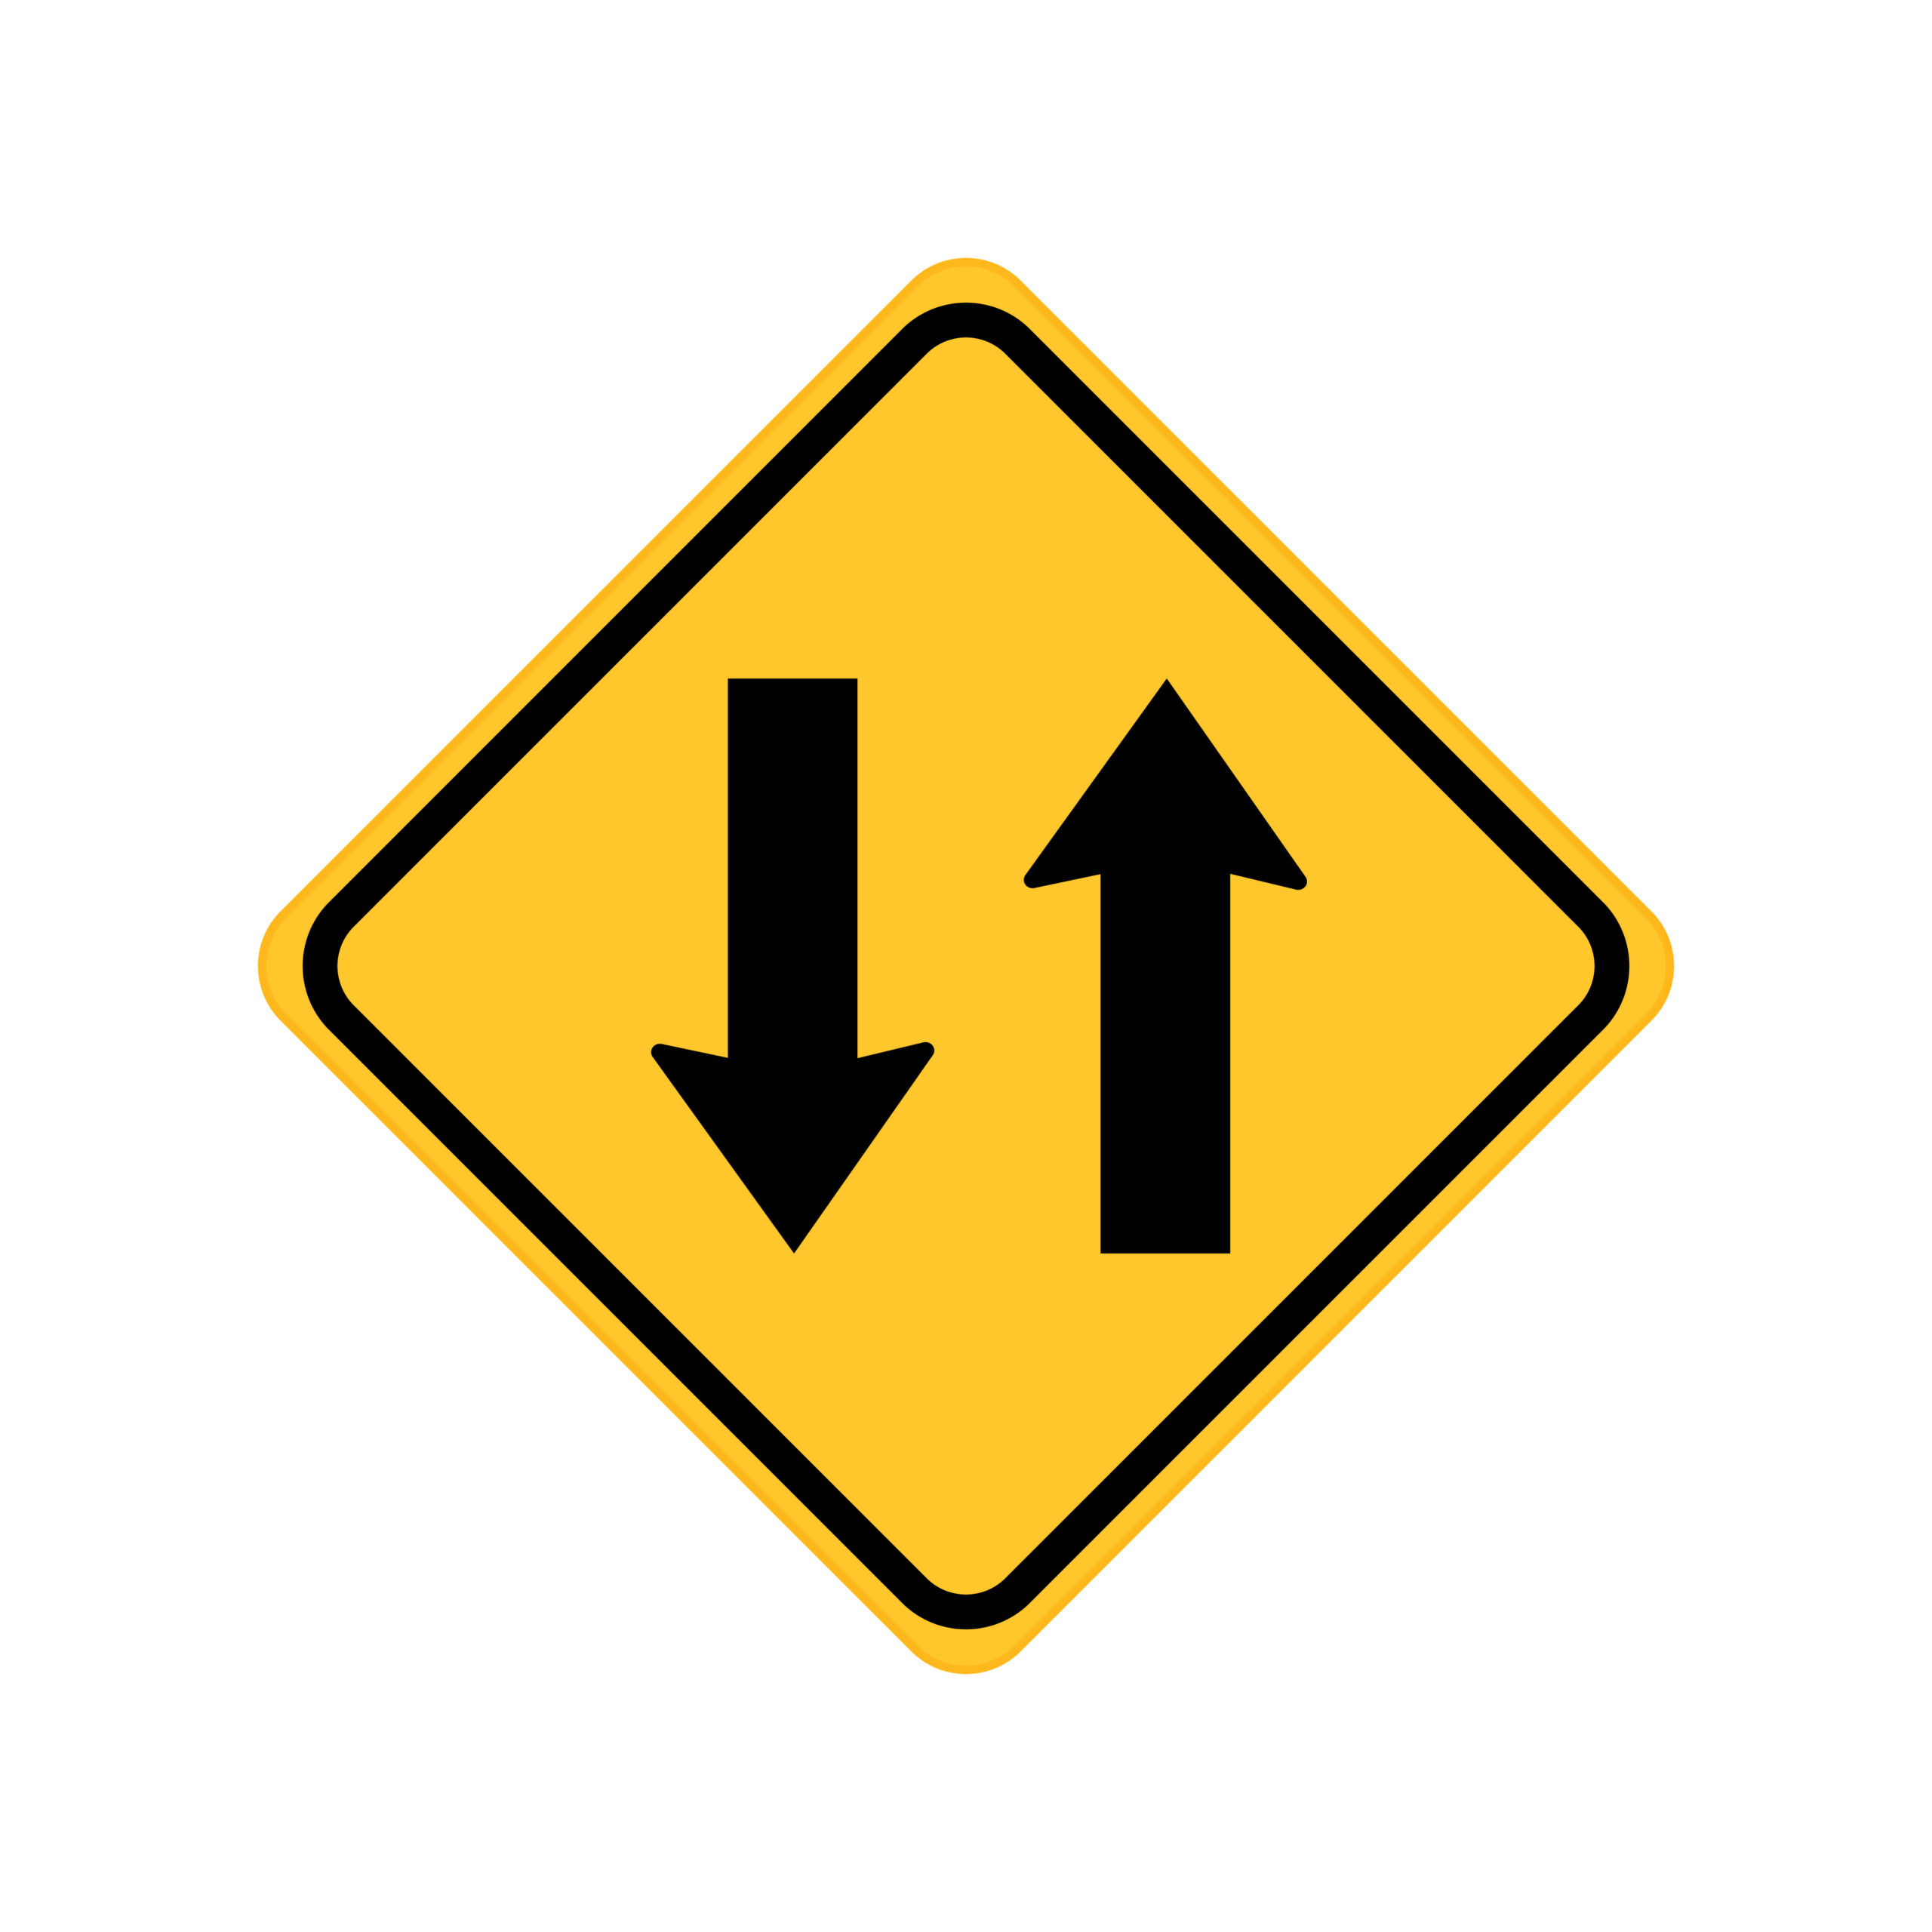 Two-way road sign isolated on white background.[Reporting Back on Impact Isn't Just for Donors]